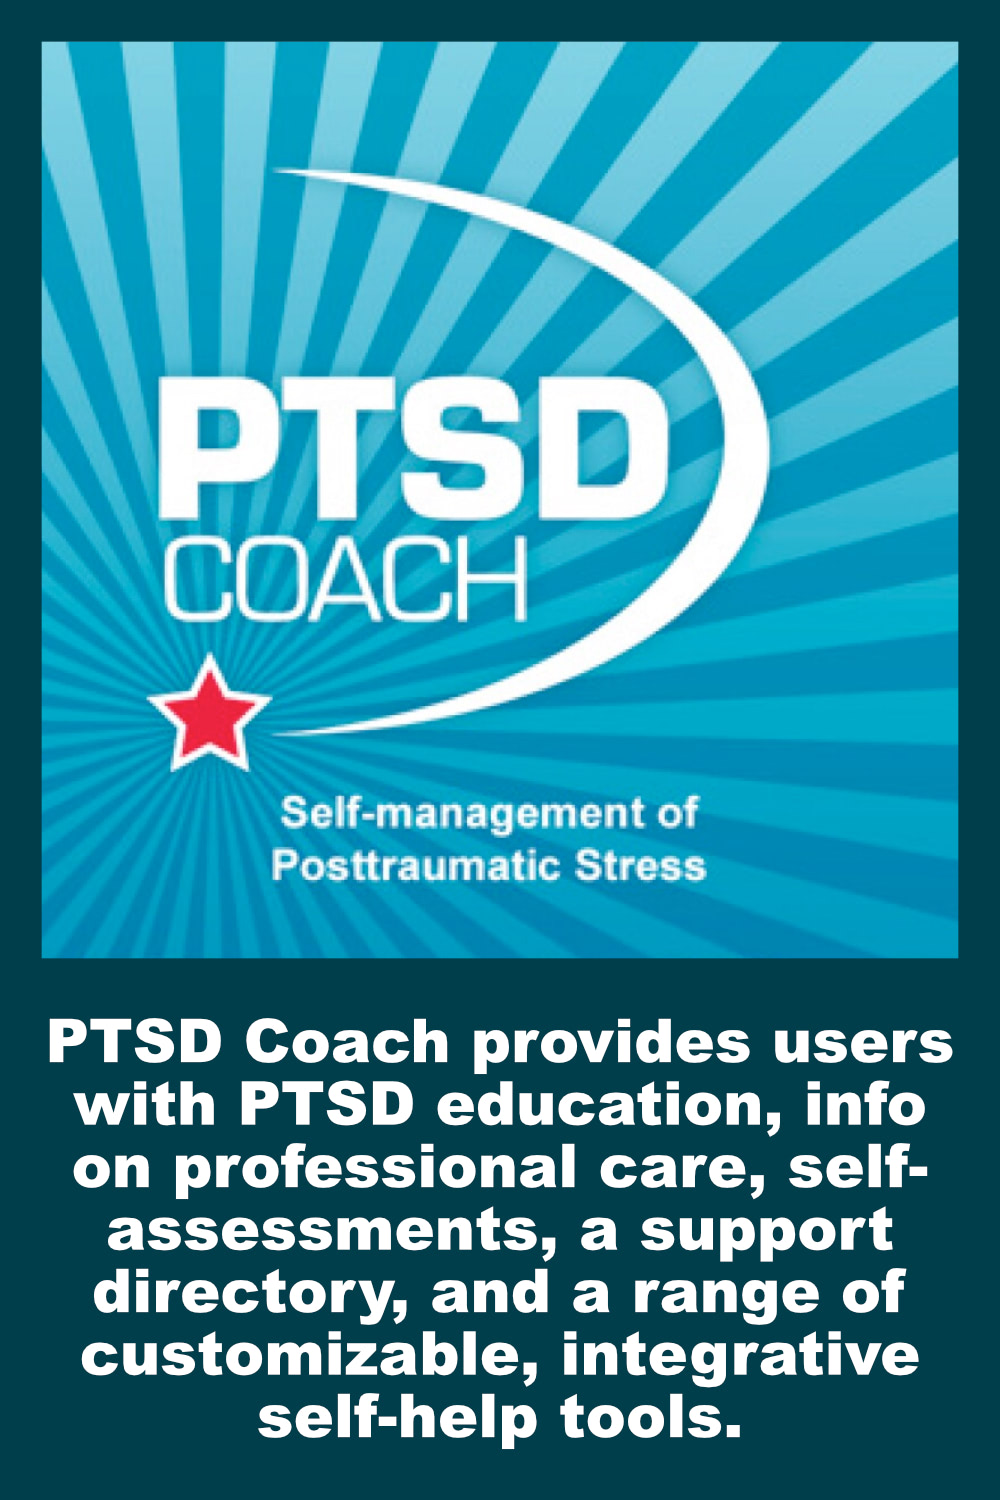 PTSD Coach provides users with PTSD education, info on professional care, self- assessments, a support directory, and a range of customizable, integrative self-help tools.